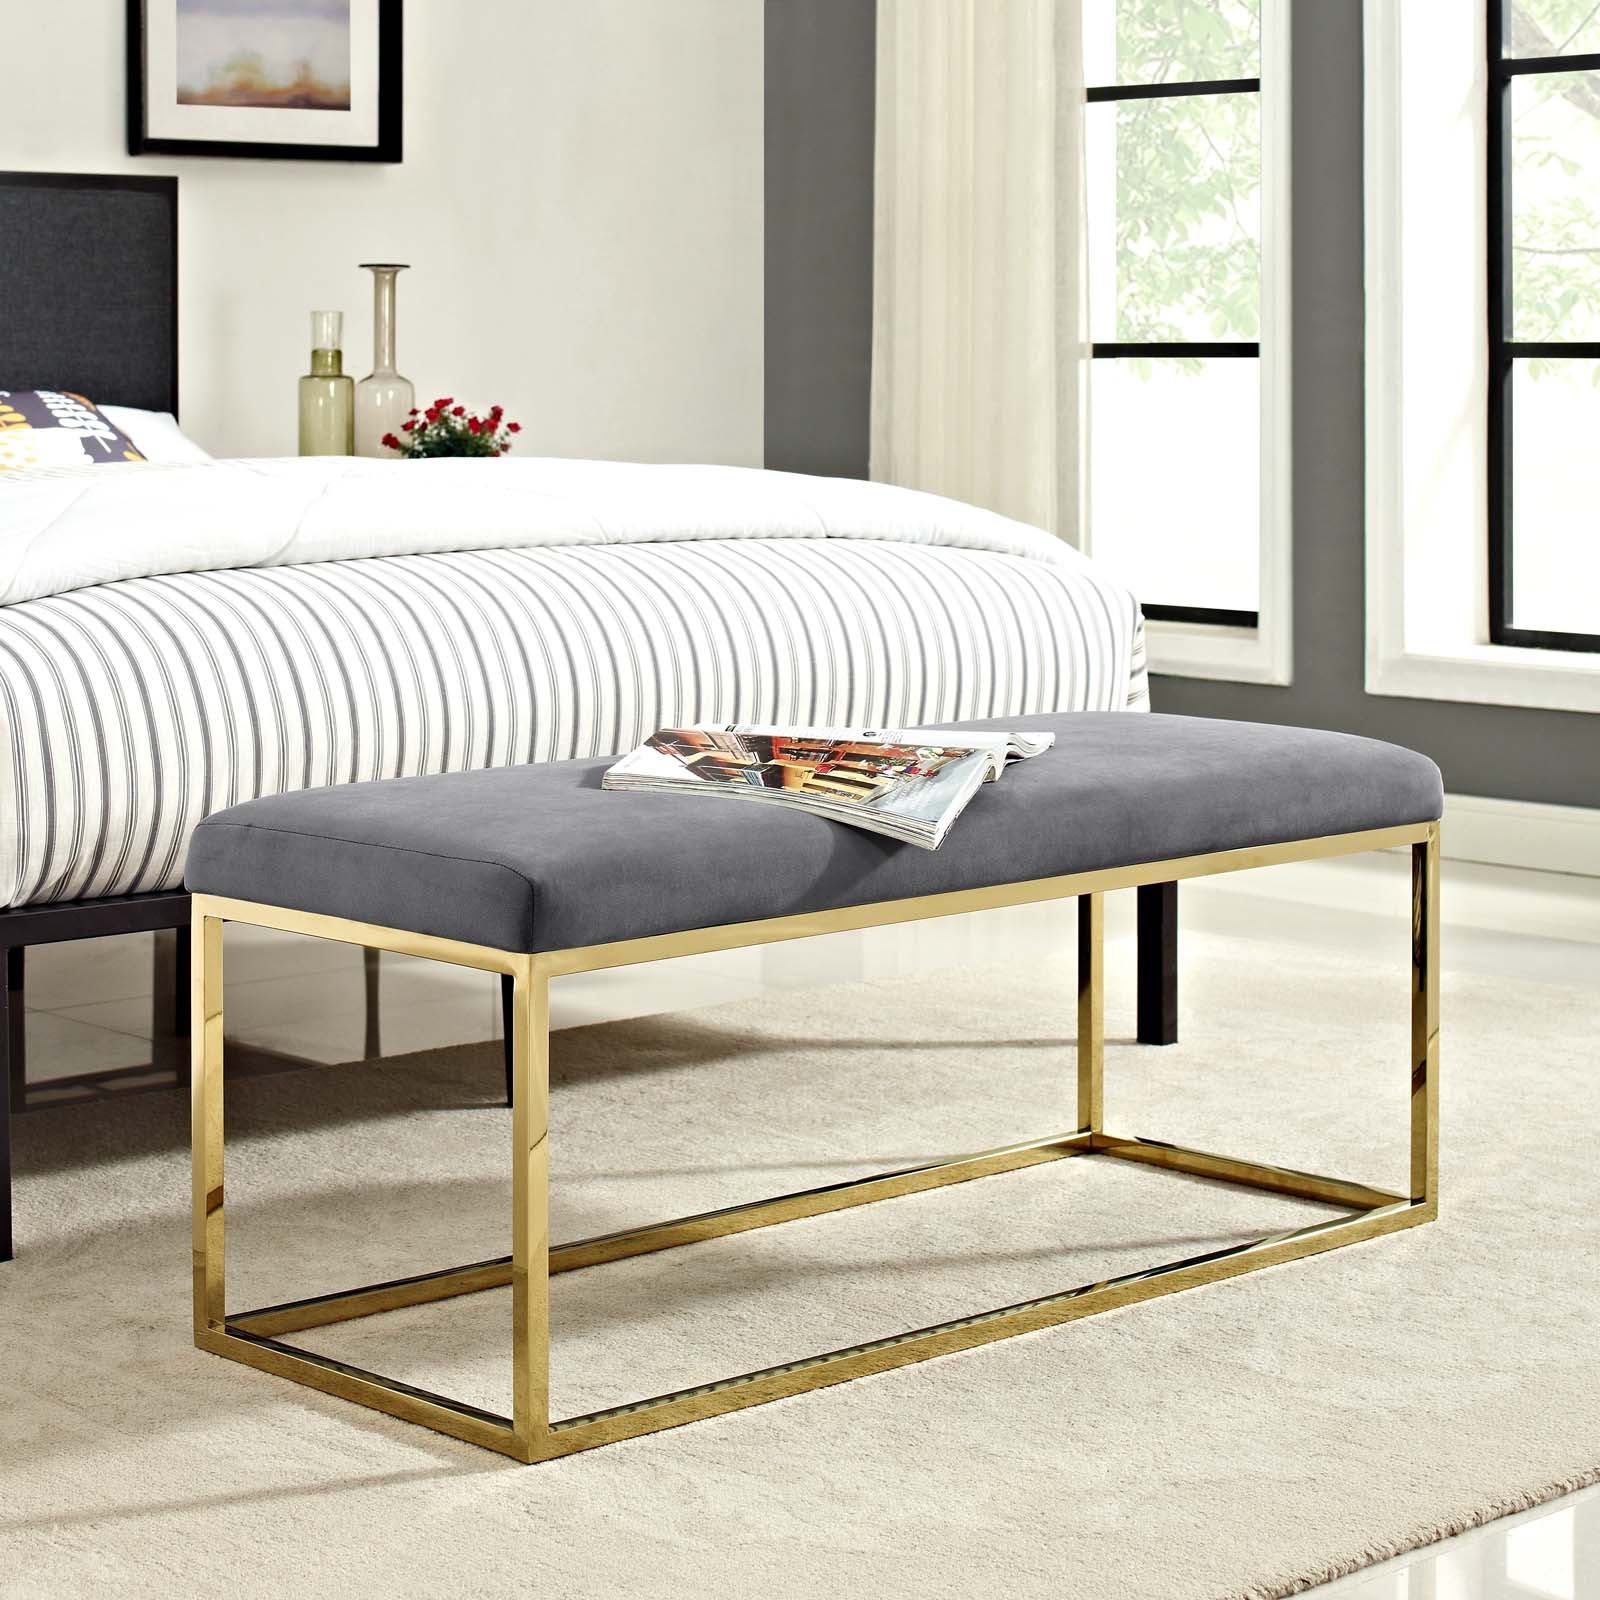 Modway Benches - Anticipate Fabric Bench Gold Gray